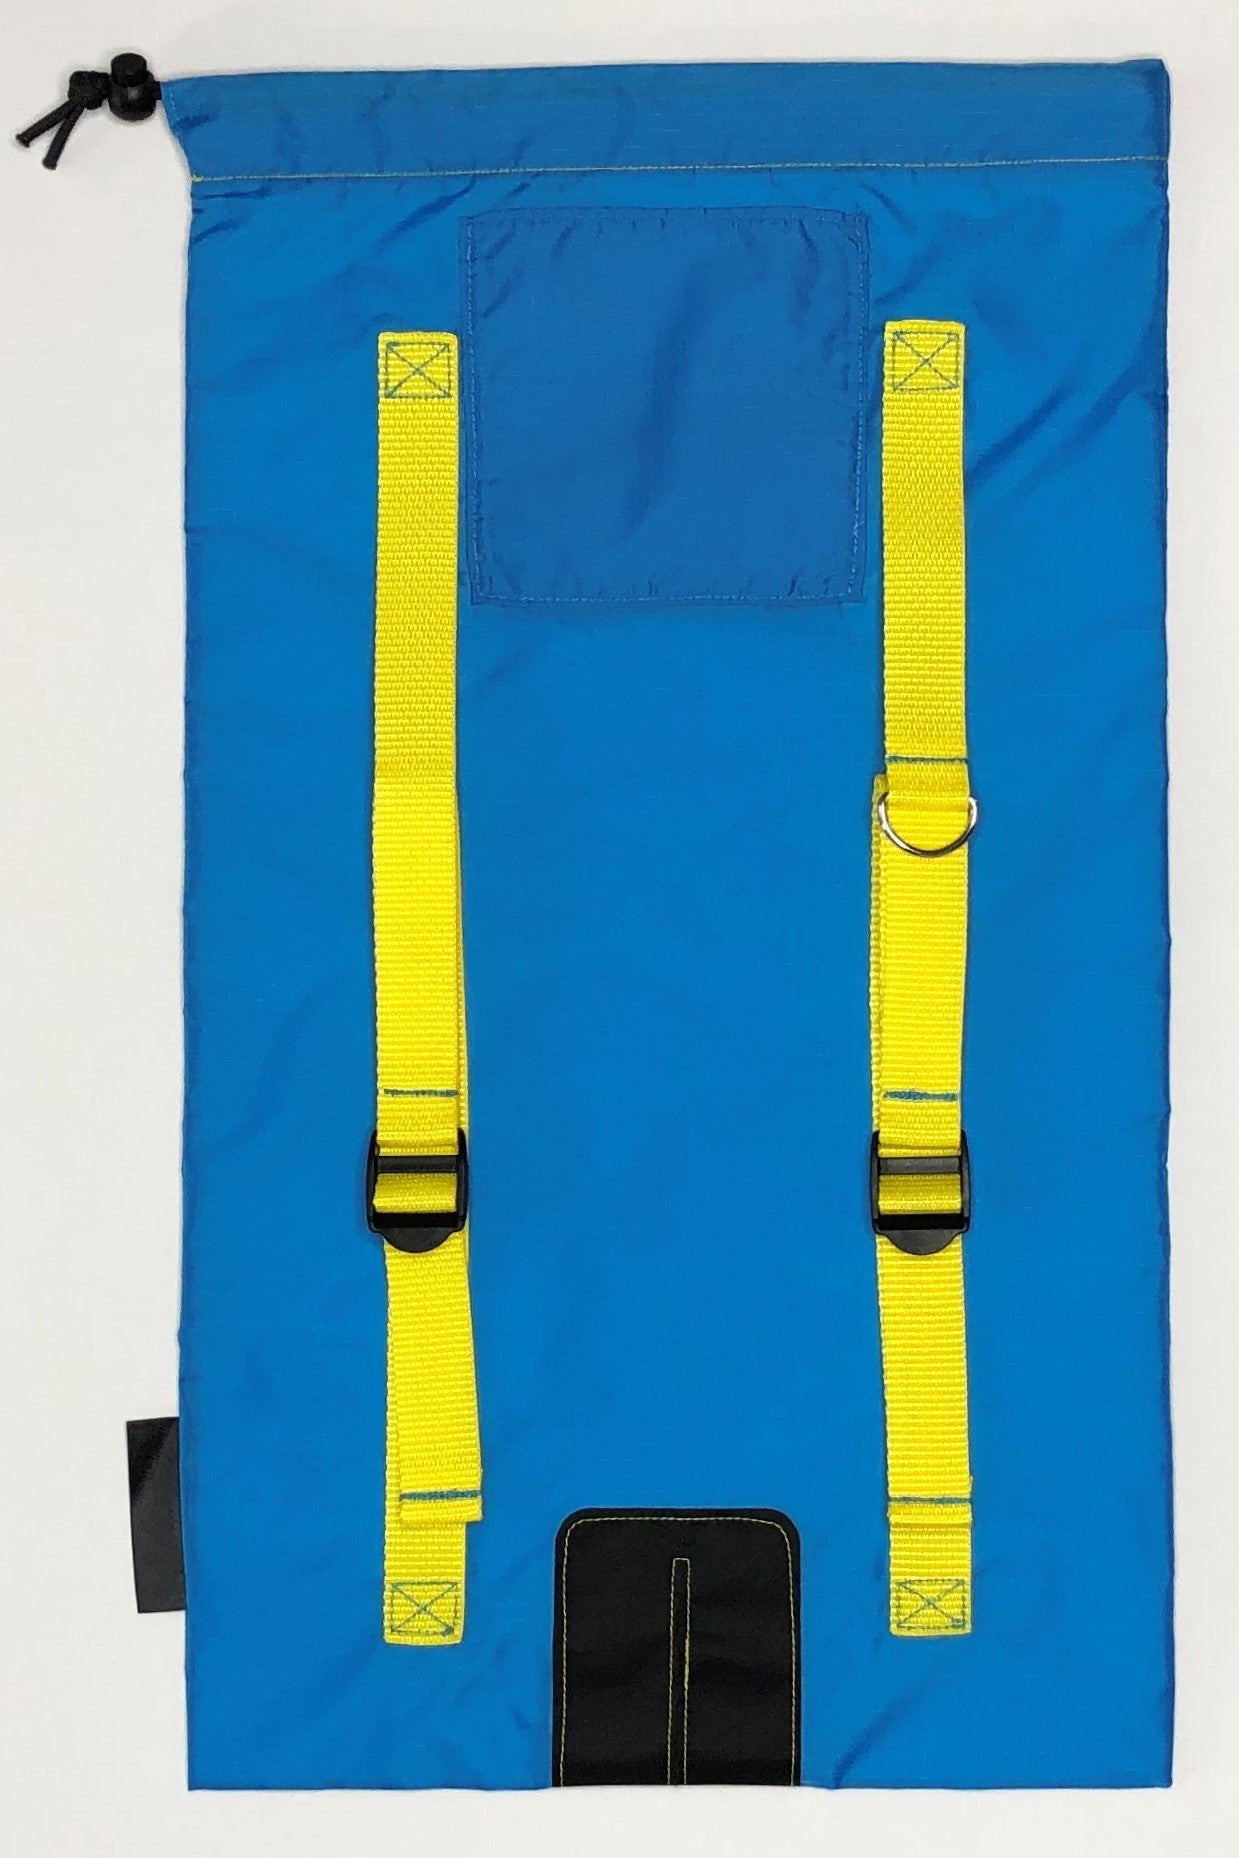 Image of blue Ski Pack fabric with yellow straps.  Features adjuster straps and d-ring for carrying ski accessories